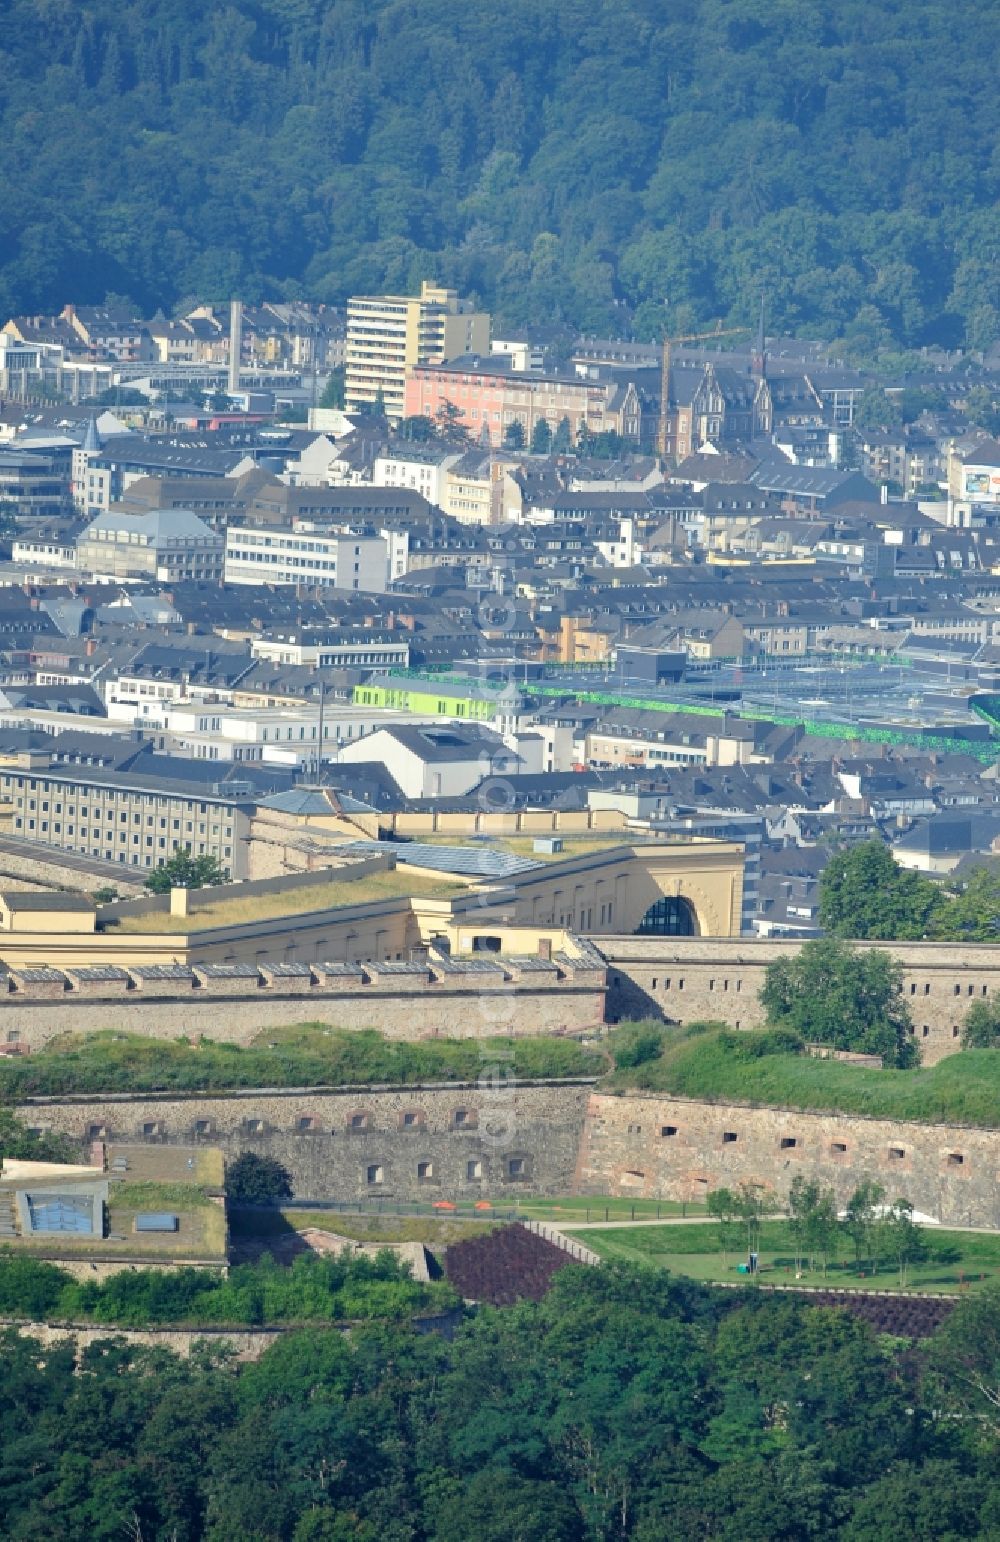 Koblenz from the bird's eye view: View of the fort Ehrenbreitstein across from the mouth of the Moselle near Koblenz. The fortification, which has existed since the 16. century, was used by the Prussian army until 1918 and is now owned by the state of Rhineland-Palatinate. It houses the State Museum Koblenz, the hostel Koblenz, the memorial of the German land forces as well as various administrative agencies. Since 2002, the fortress is a UNESCO World Heritage Upper Middle Rhine Valley, and cultural property protected under the Hague Convention